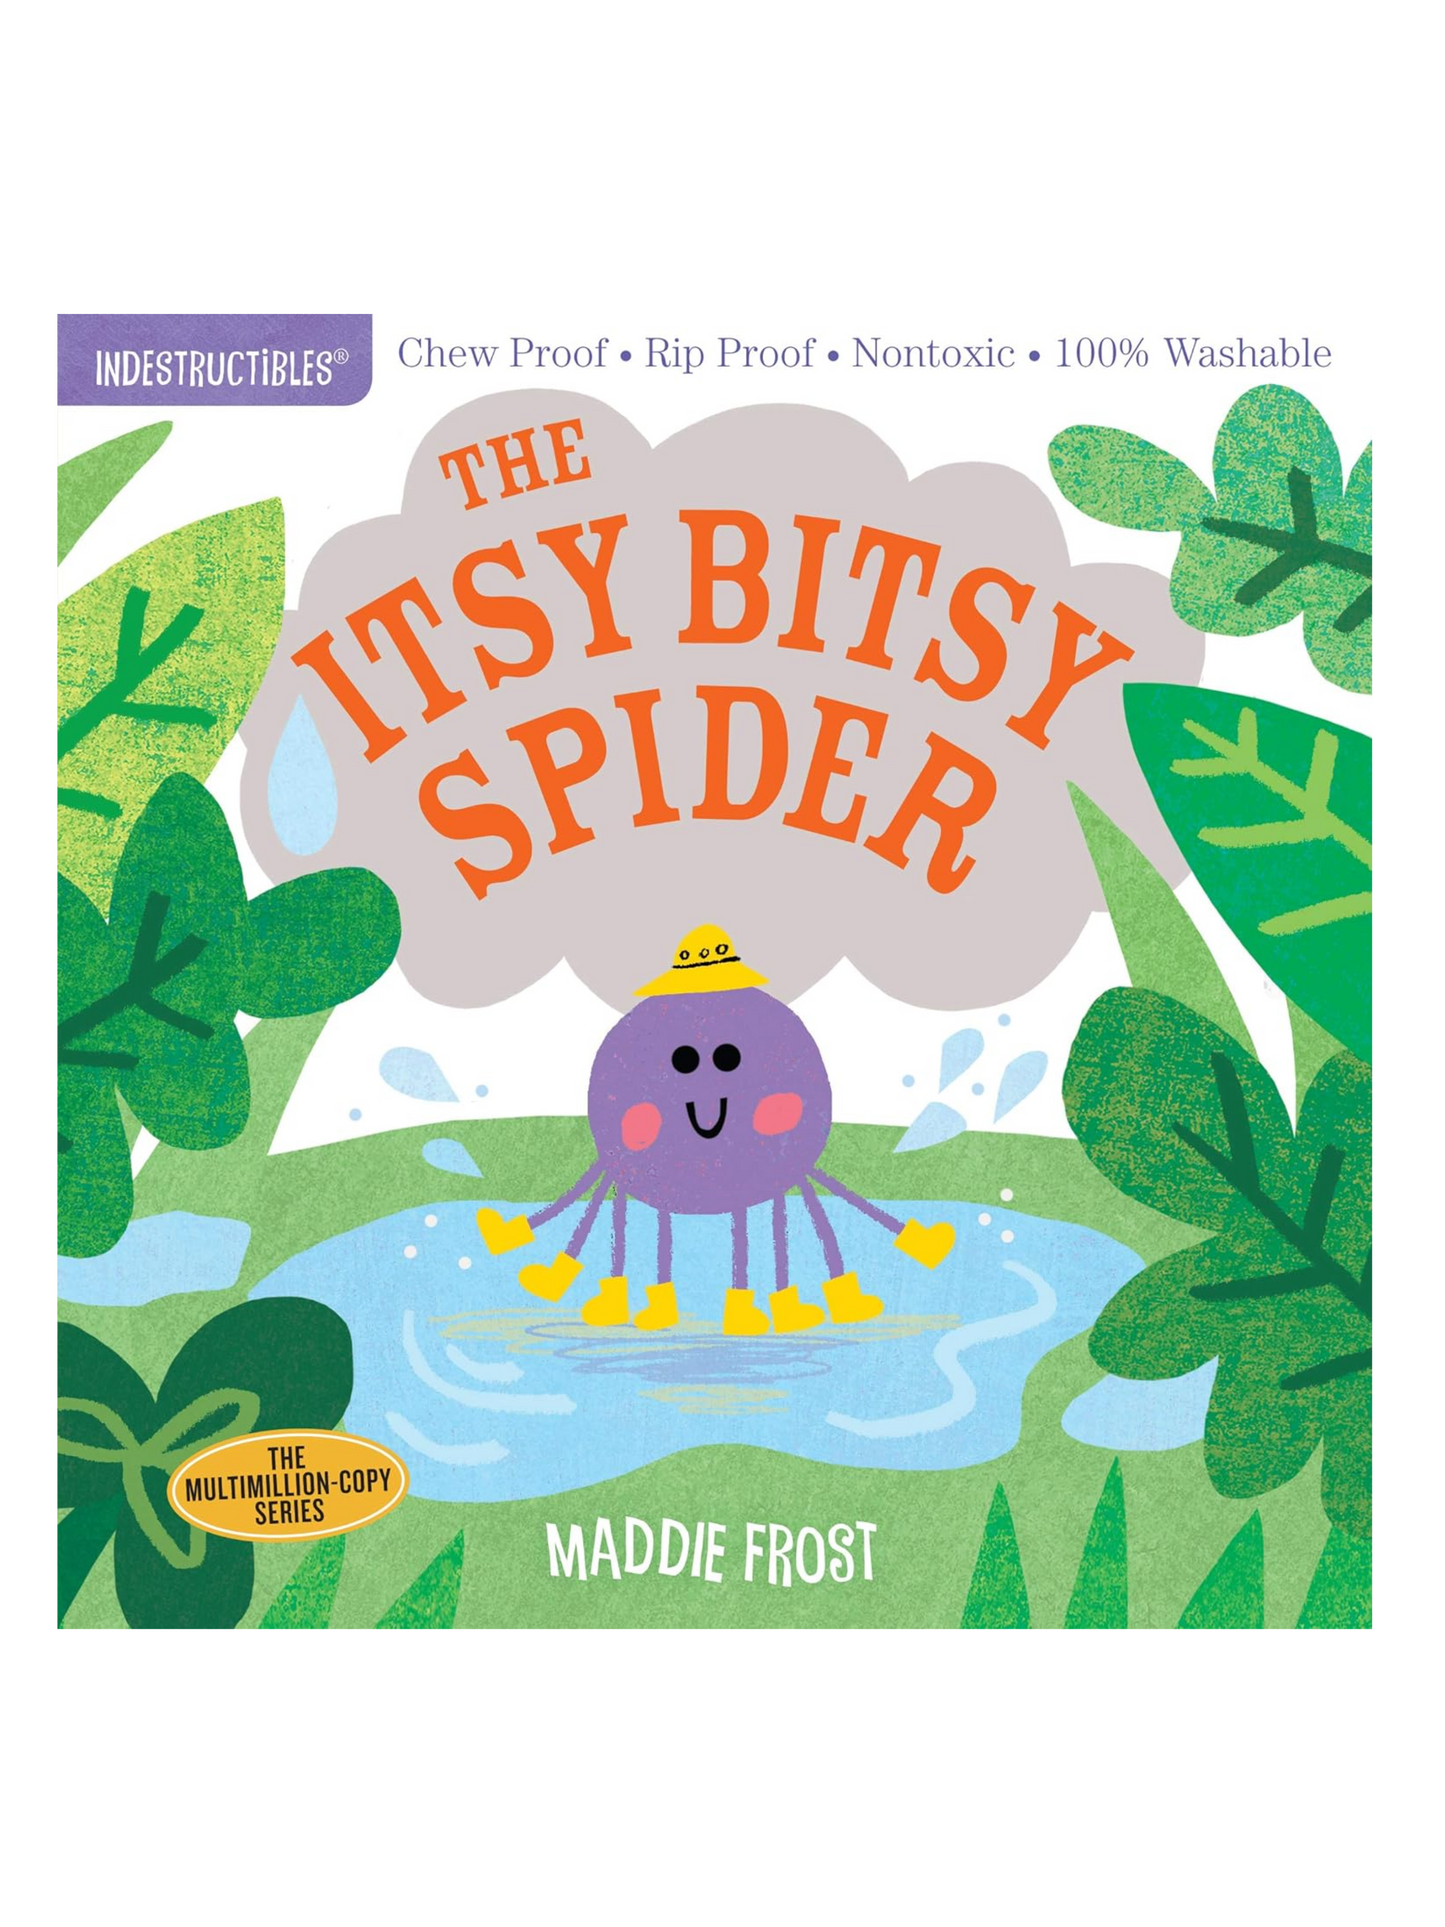 THE ITSY BITSY SPIDER THE ORIGINAL INDESTRUCTIBLES BOOKS - THE LITTLE EAGLE BOUTIQUE